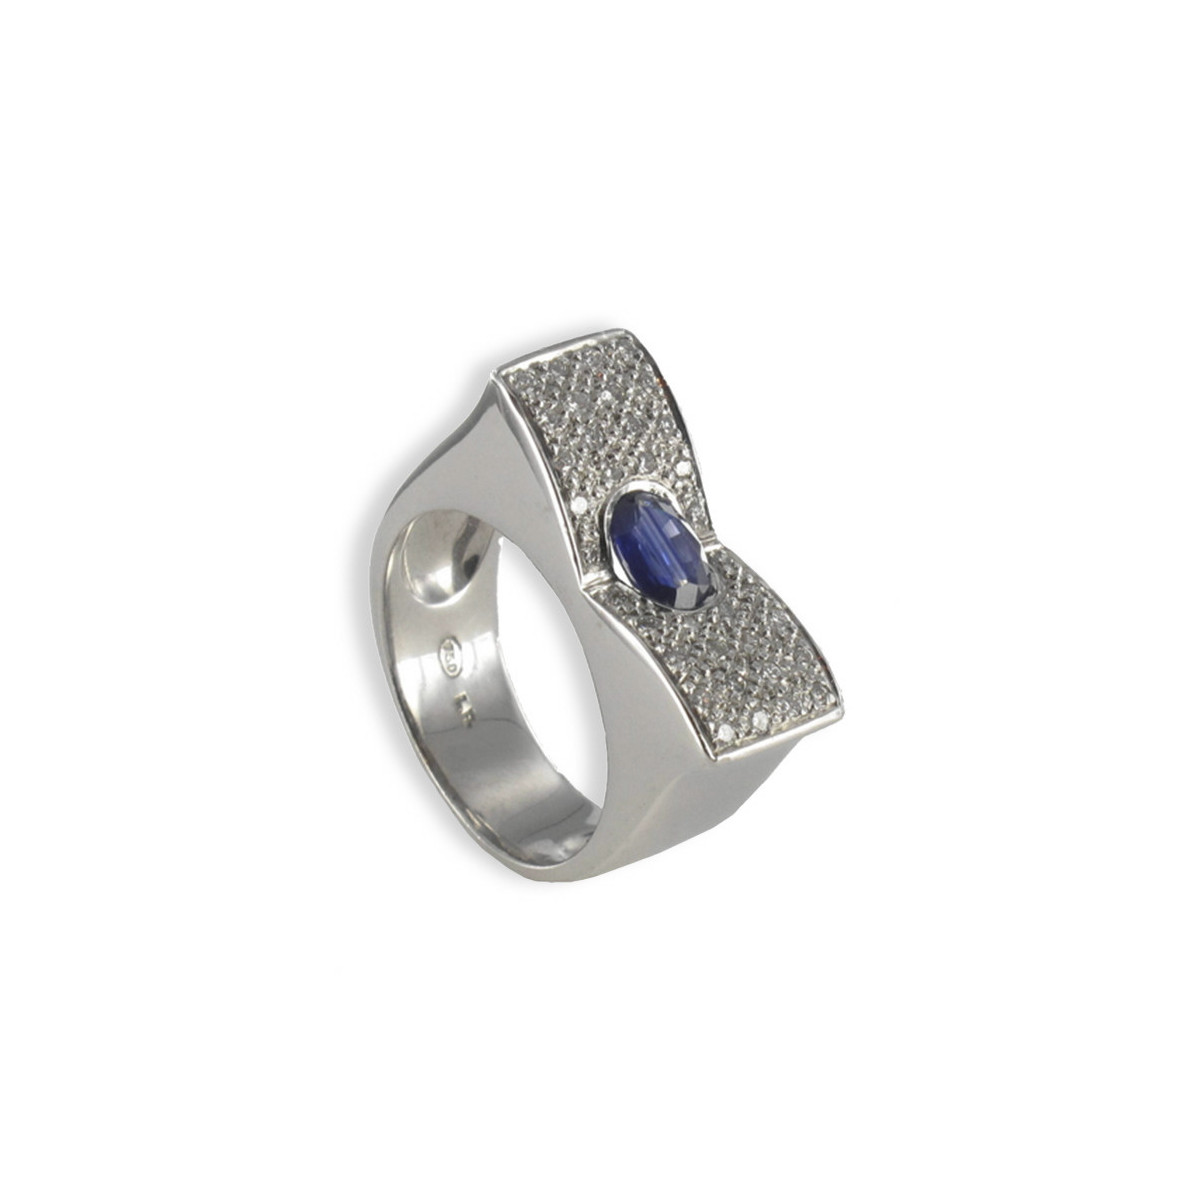 GOLD RING WITH DIAMONDS AND SAPPHIRE